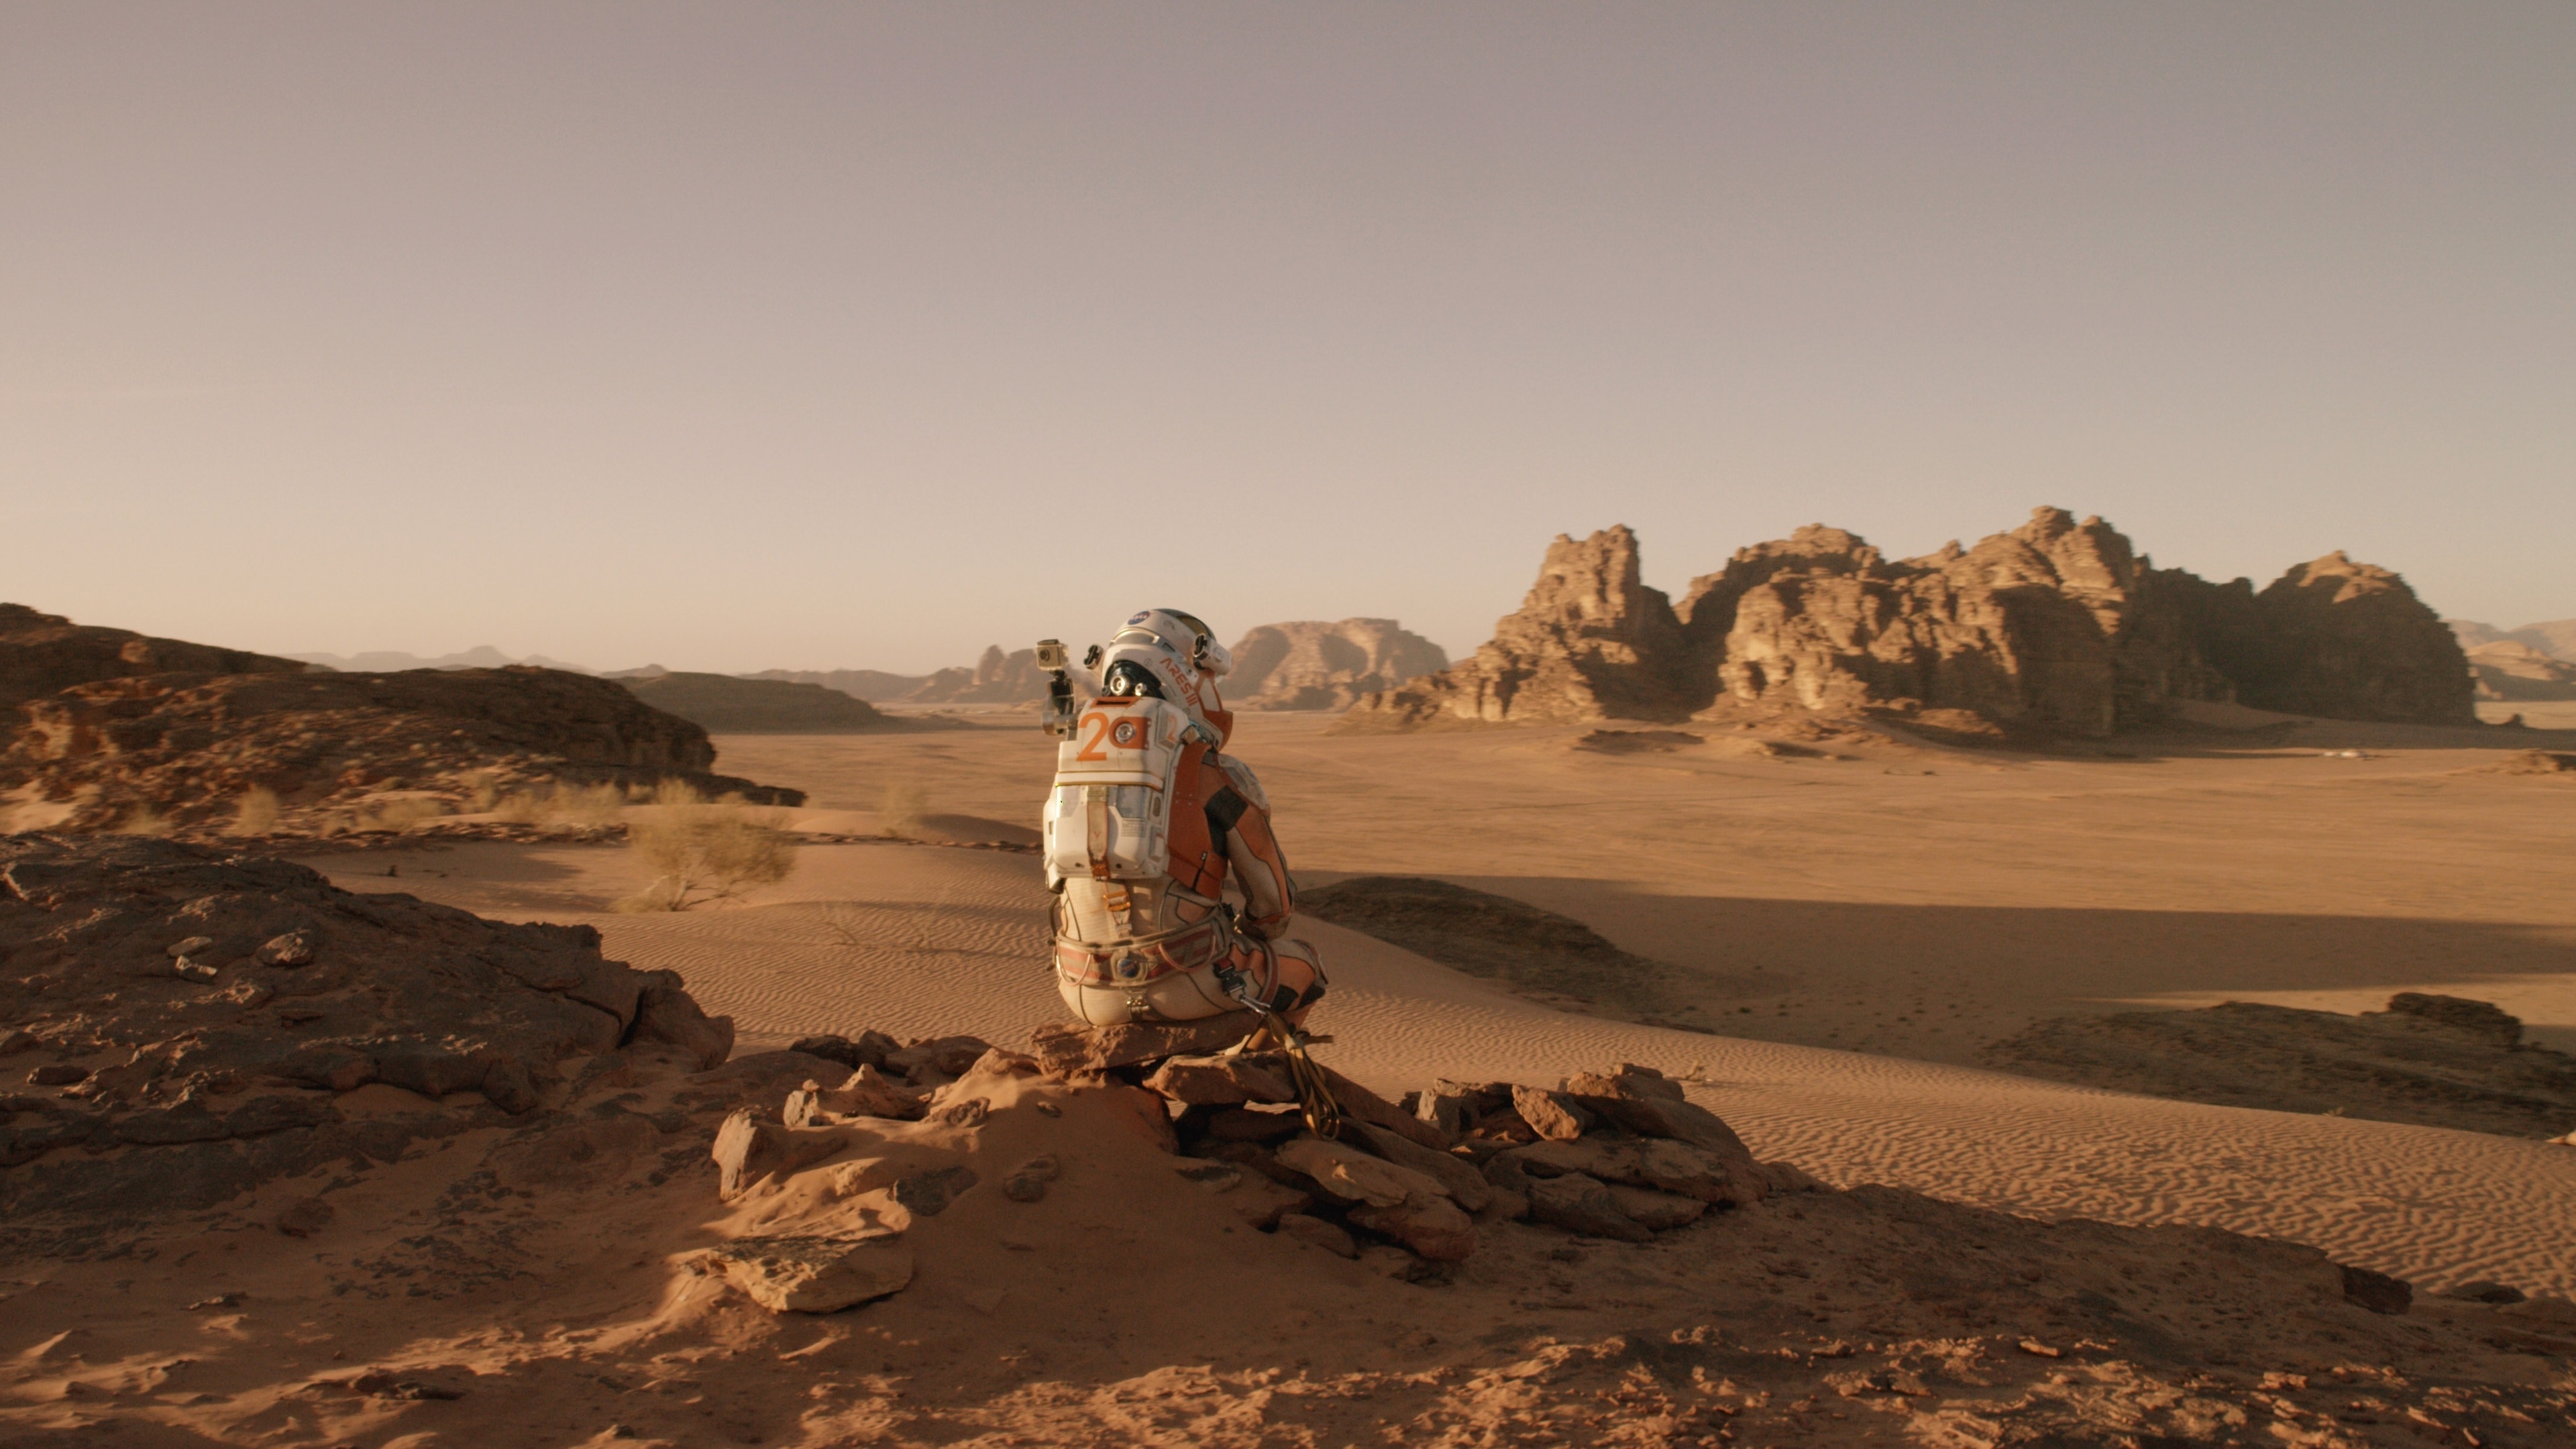 The Martian Lonely for 3840 x 2160 Ultra HD resolution